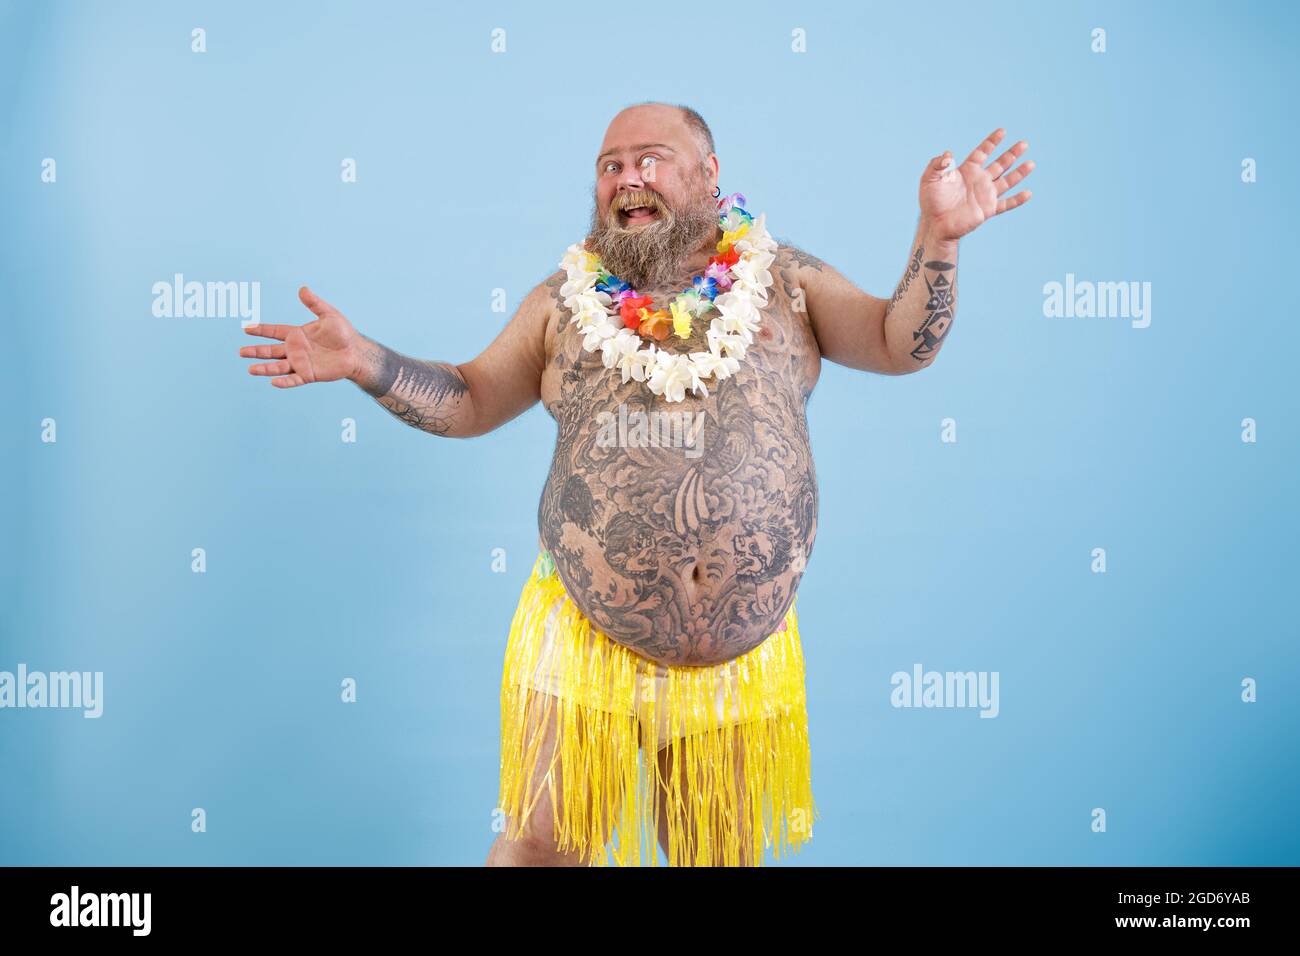 Positive fat man with tattoos in decorative grass skirt dances on light blue background Stock Photo